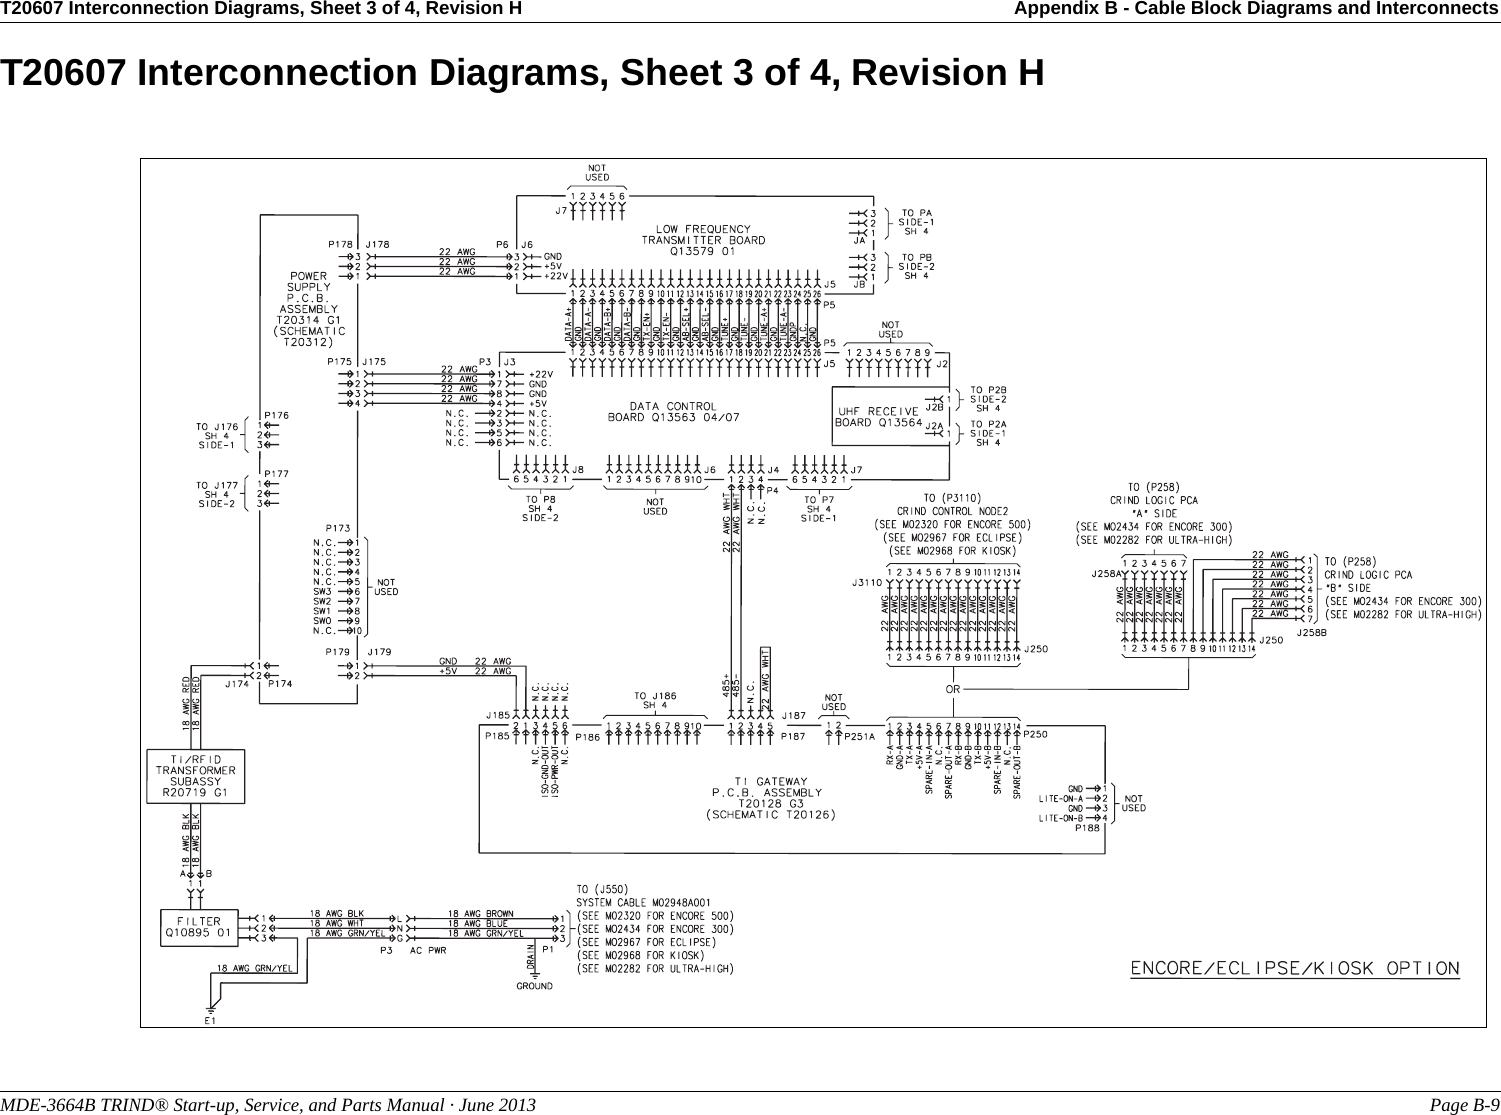 T20607 Interconnection Diagrams, Sheet 3 of 4, Revision H Appendix B - Cable Block Diagrams and InterconnectsMDE-3664B TRIND® Start-up, Service, and Parts Manual · June 2013 Page B-9T20607 Interconnection Diagrams, Sheet 3 of 4, Revision H